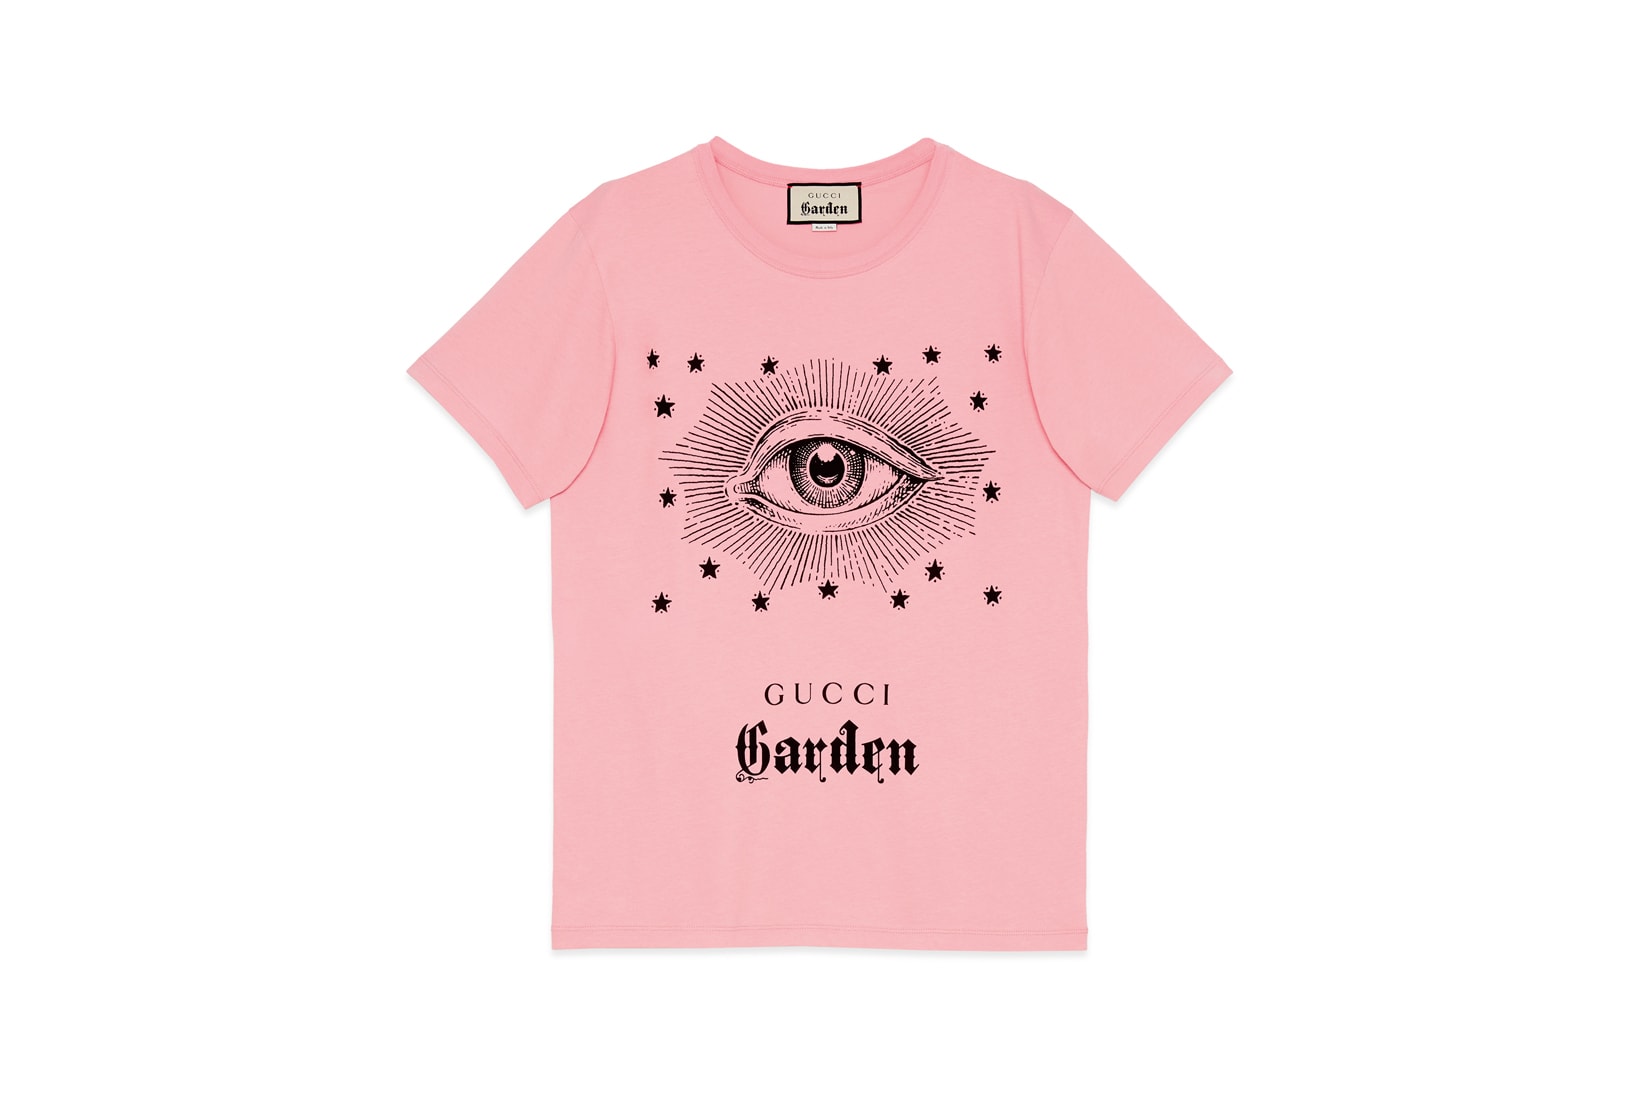 Gucci Garden Capsule Collection Eye T-shirt Pink